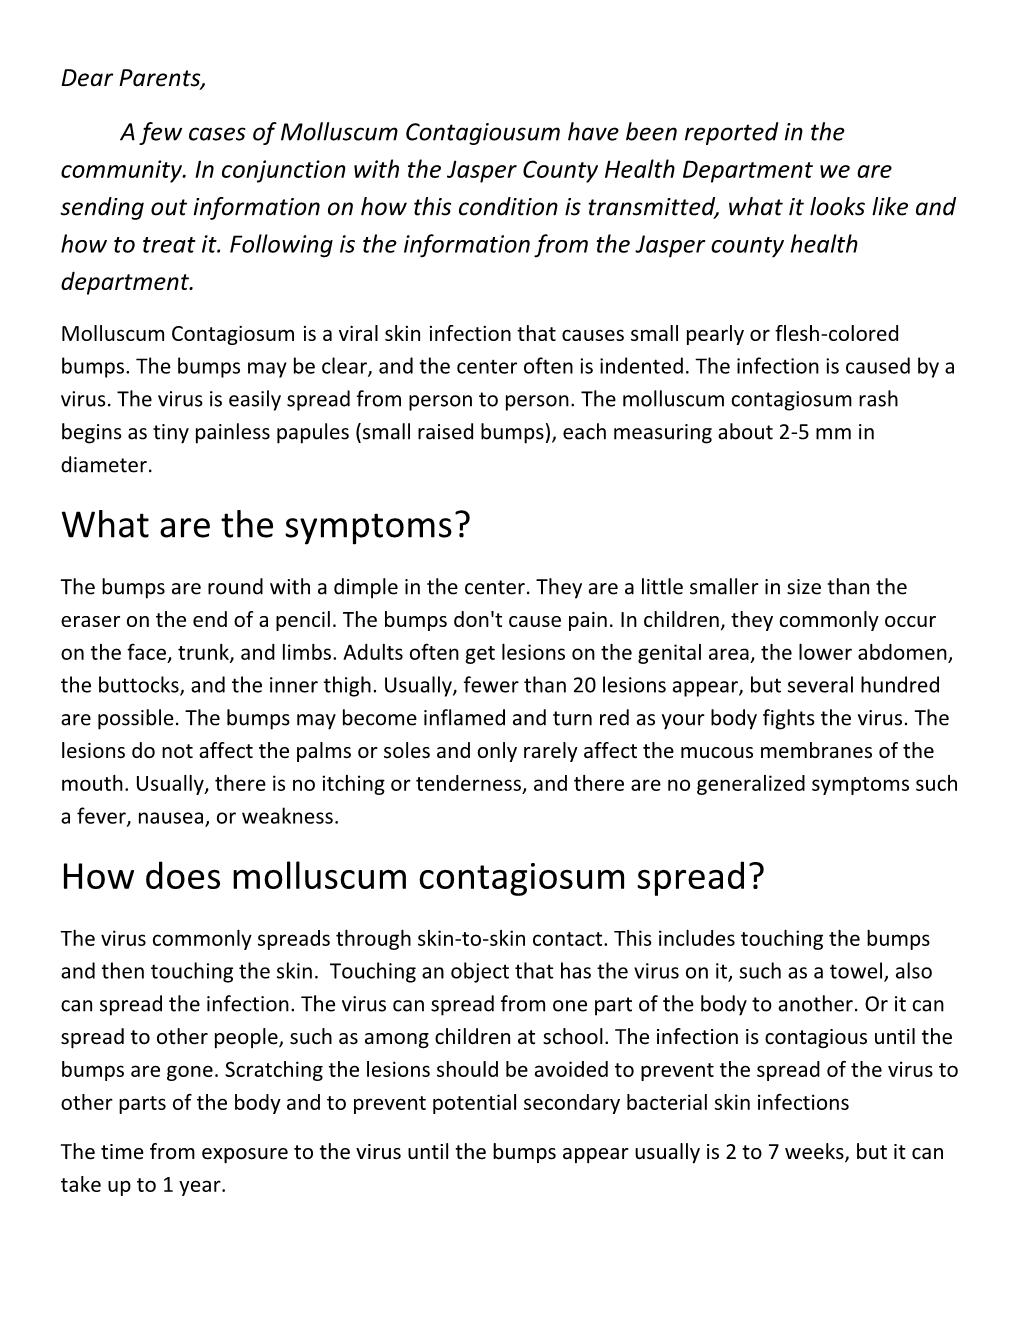 What Are the Symptoms? How Does Molluscum Contagiosum Spread?